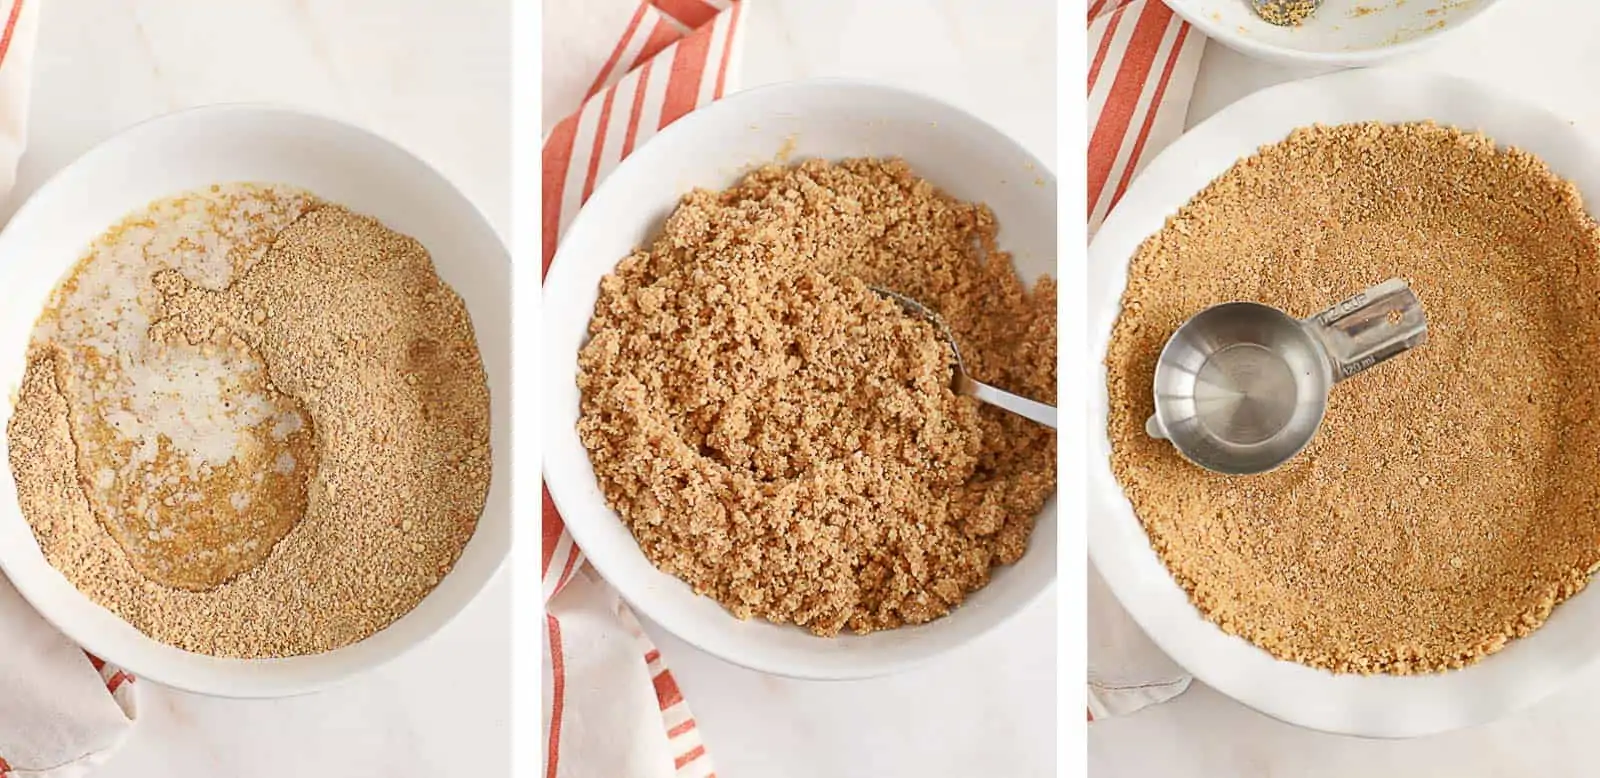 Graham cracker crust collage: graham cracker crumbs and melted butter in a bowl and crust in a white pie dish.